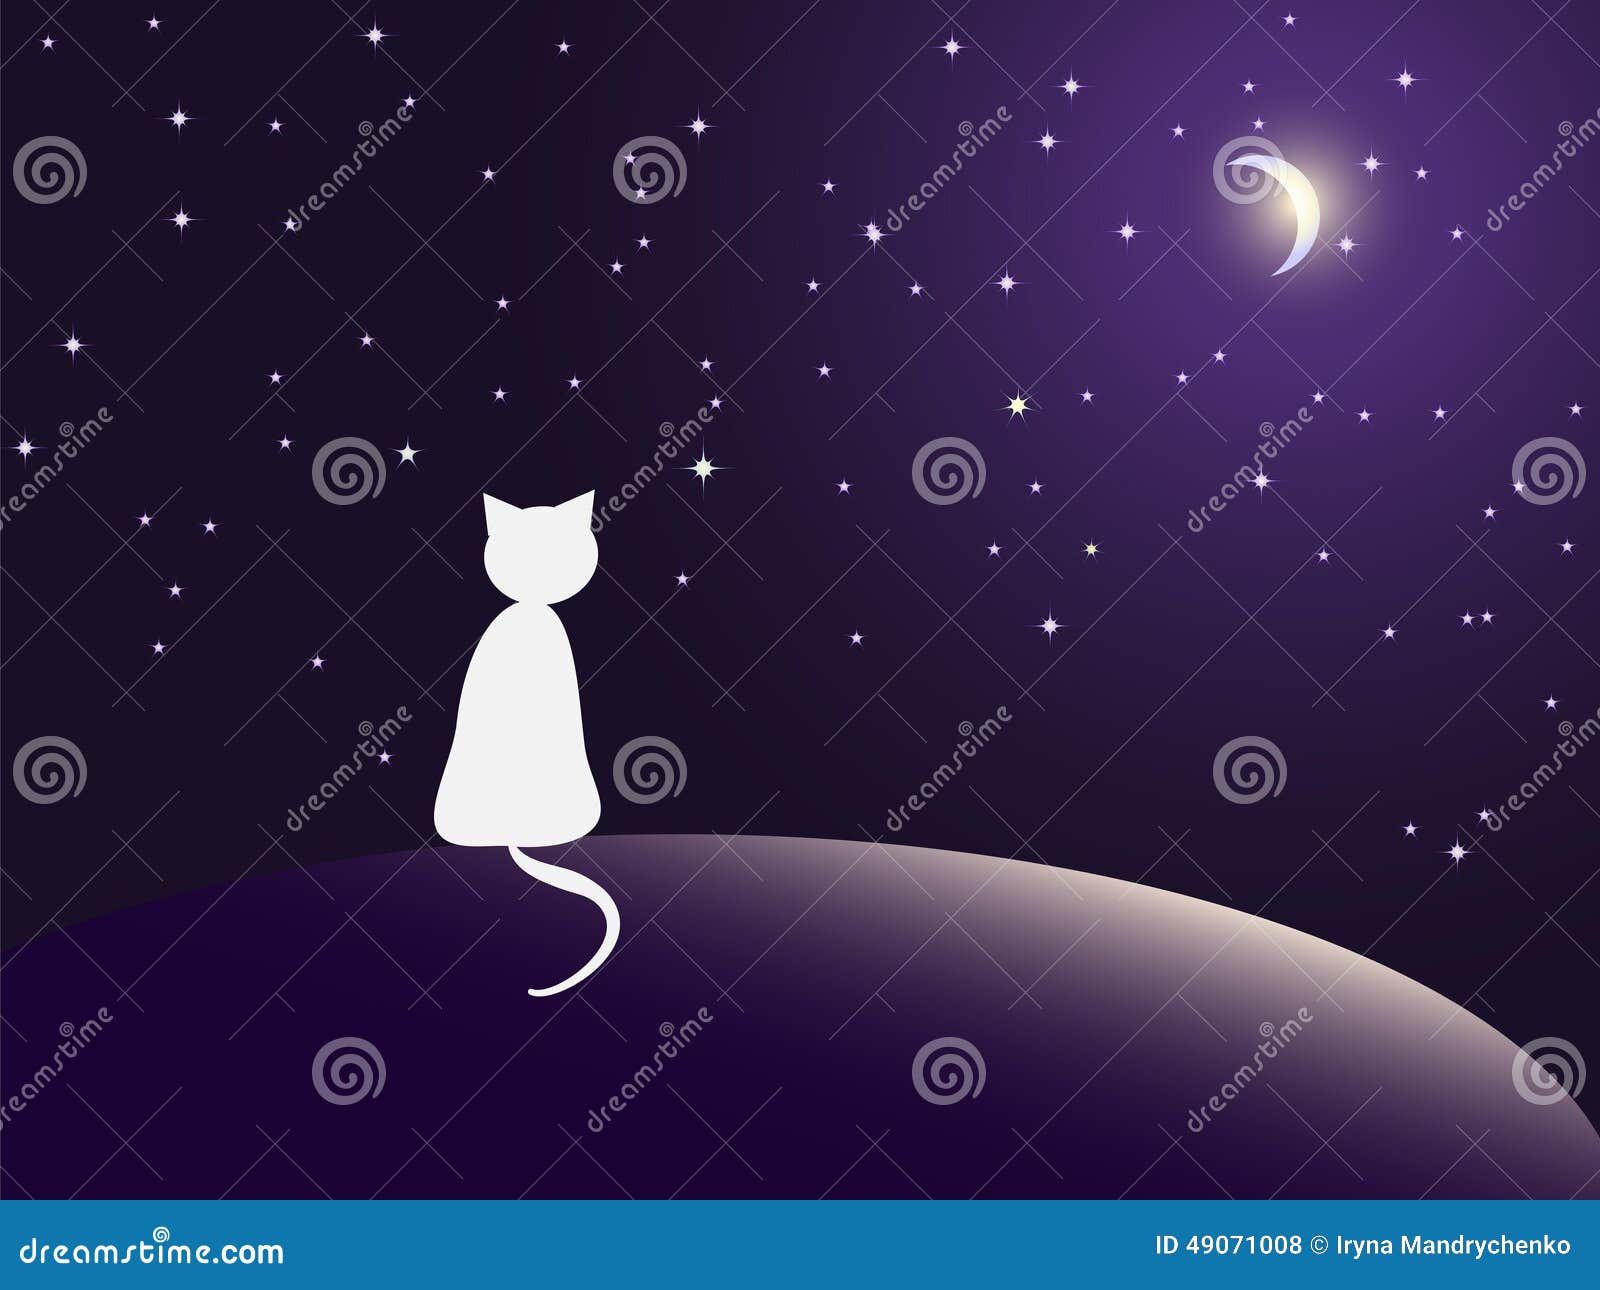 Lonely cat watching stars stock vector. Illustration of pets - 49071008